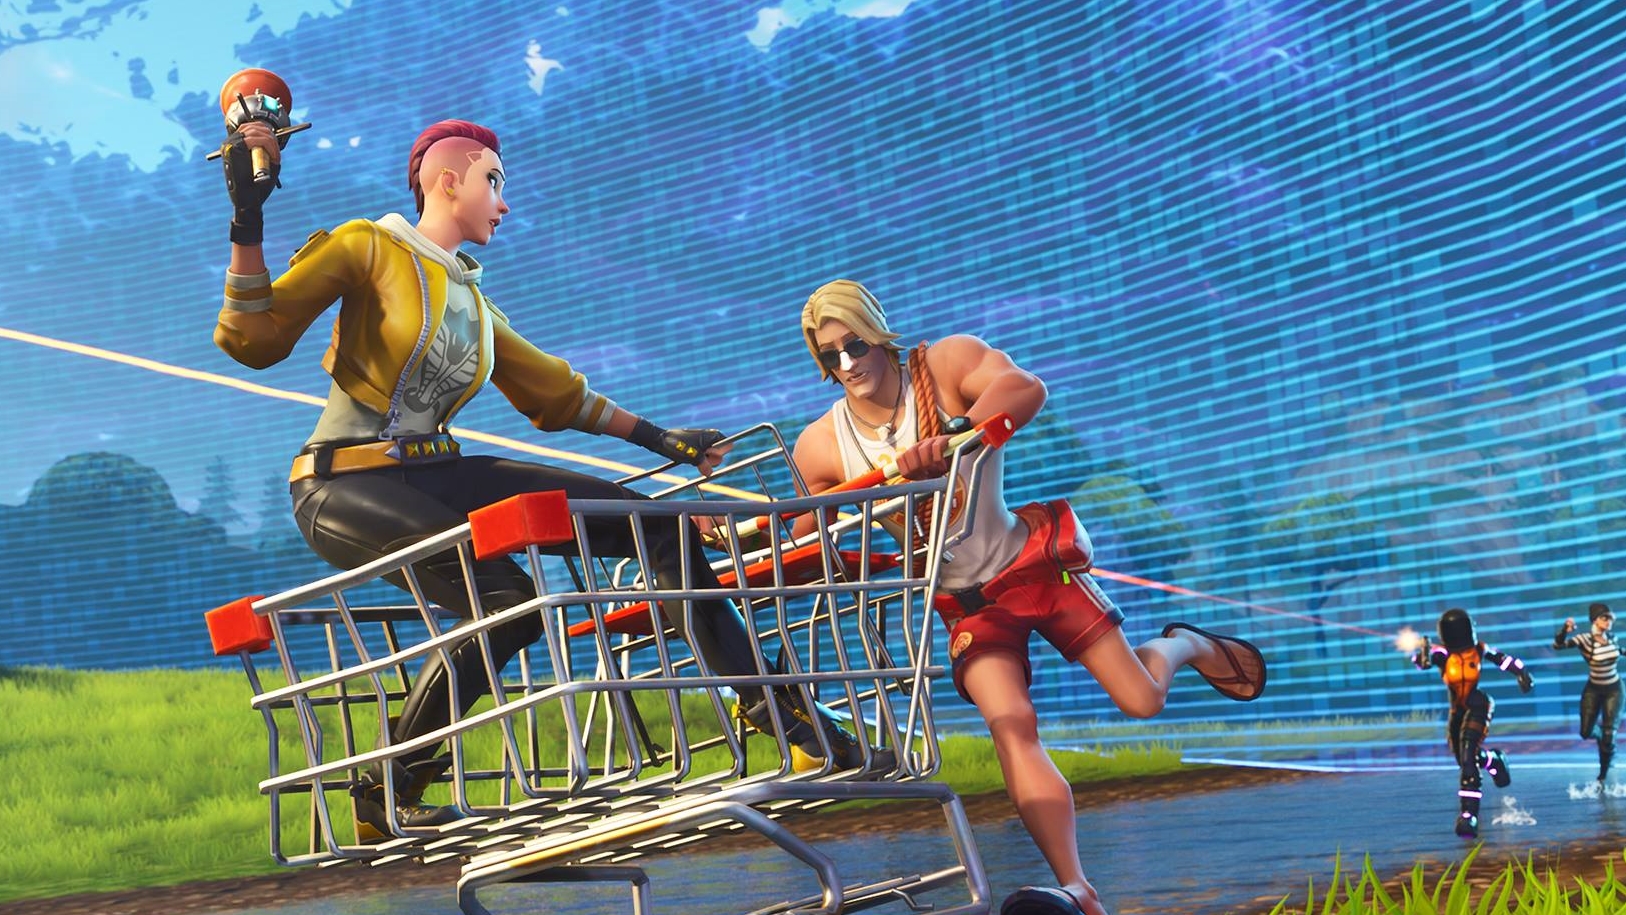 Fortnite-Season-6-guide-release-date-map-changes-and-skins